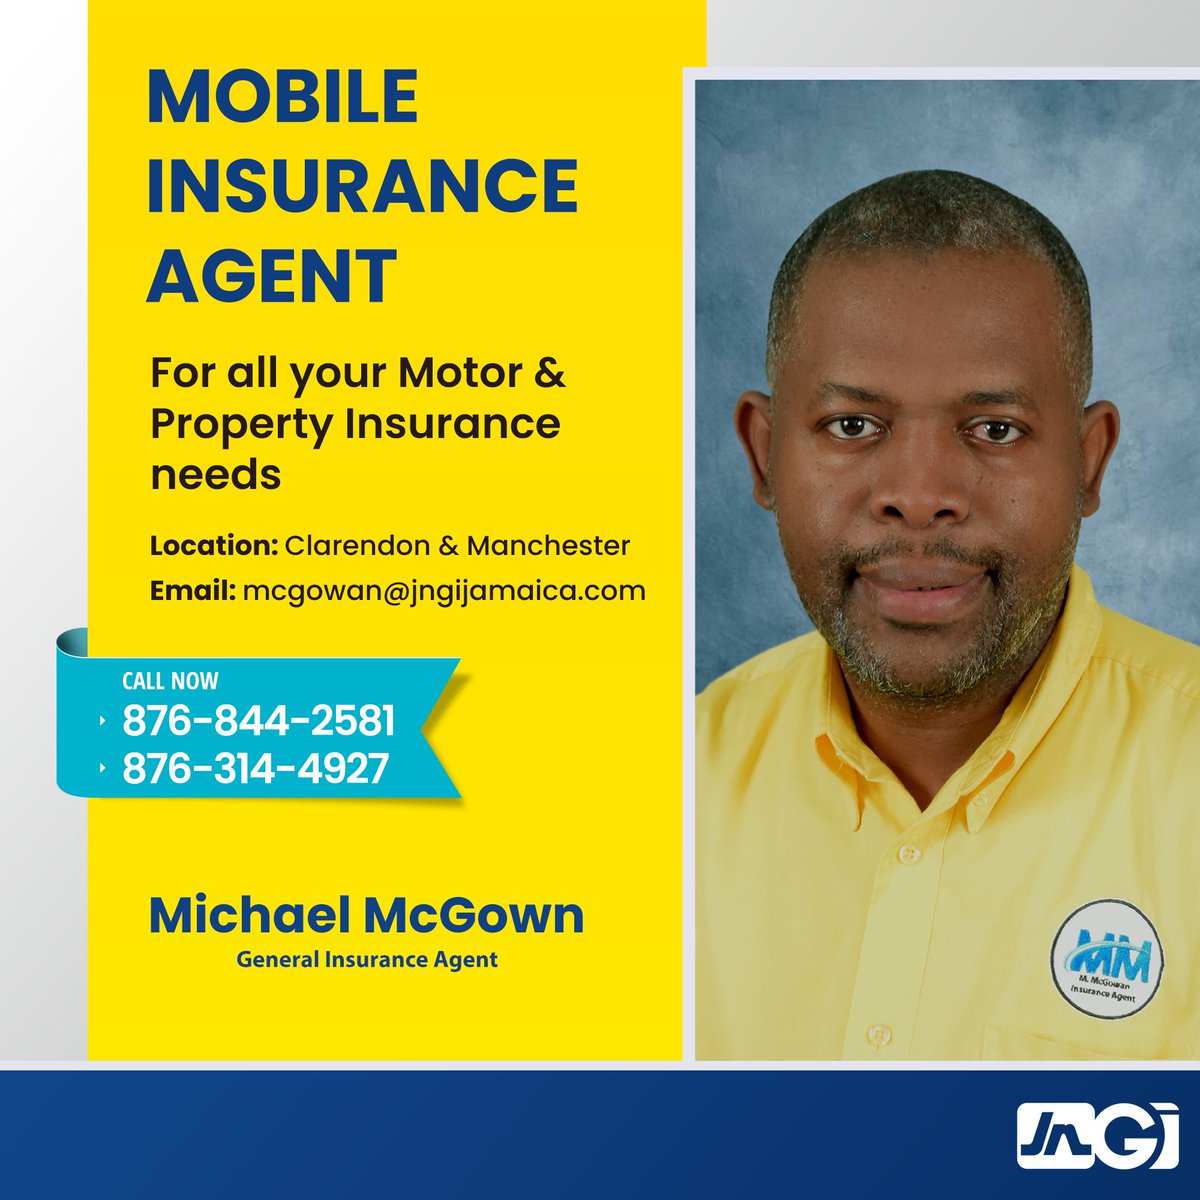 Looking for help with your mobile and property insurance? Our dedicated Mobile Insurance Agents are ready to assist you! Contact Michael McGown today for expert guidance.
Click the link in our bio for more details!
#JNGIJamaica #InsuranceAssistance #ExpertHelp #MotorInsurance